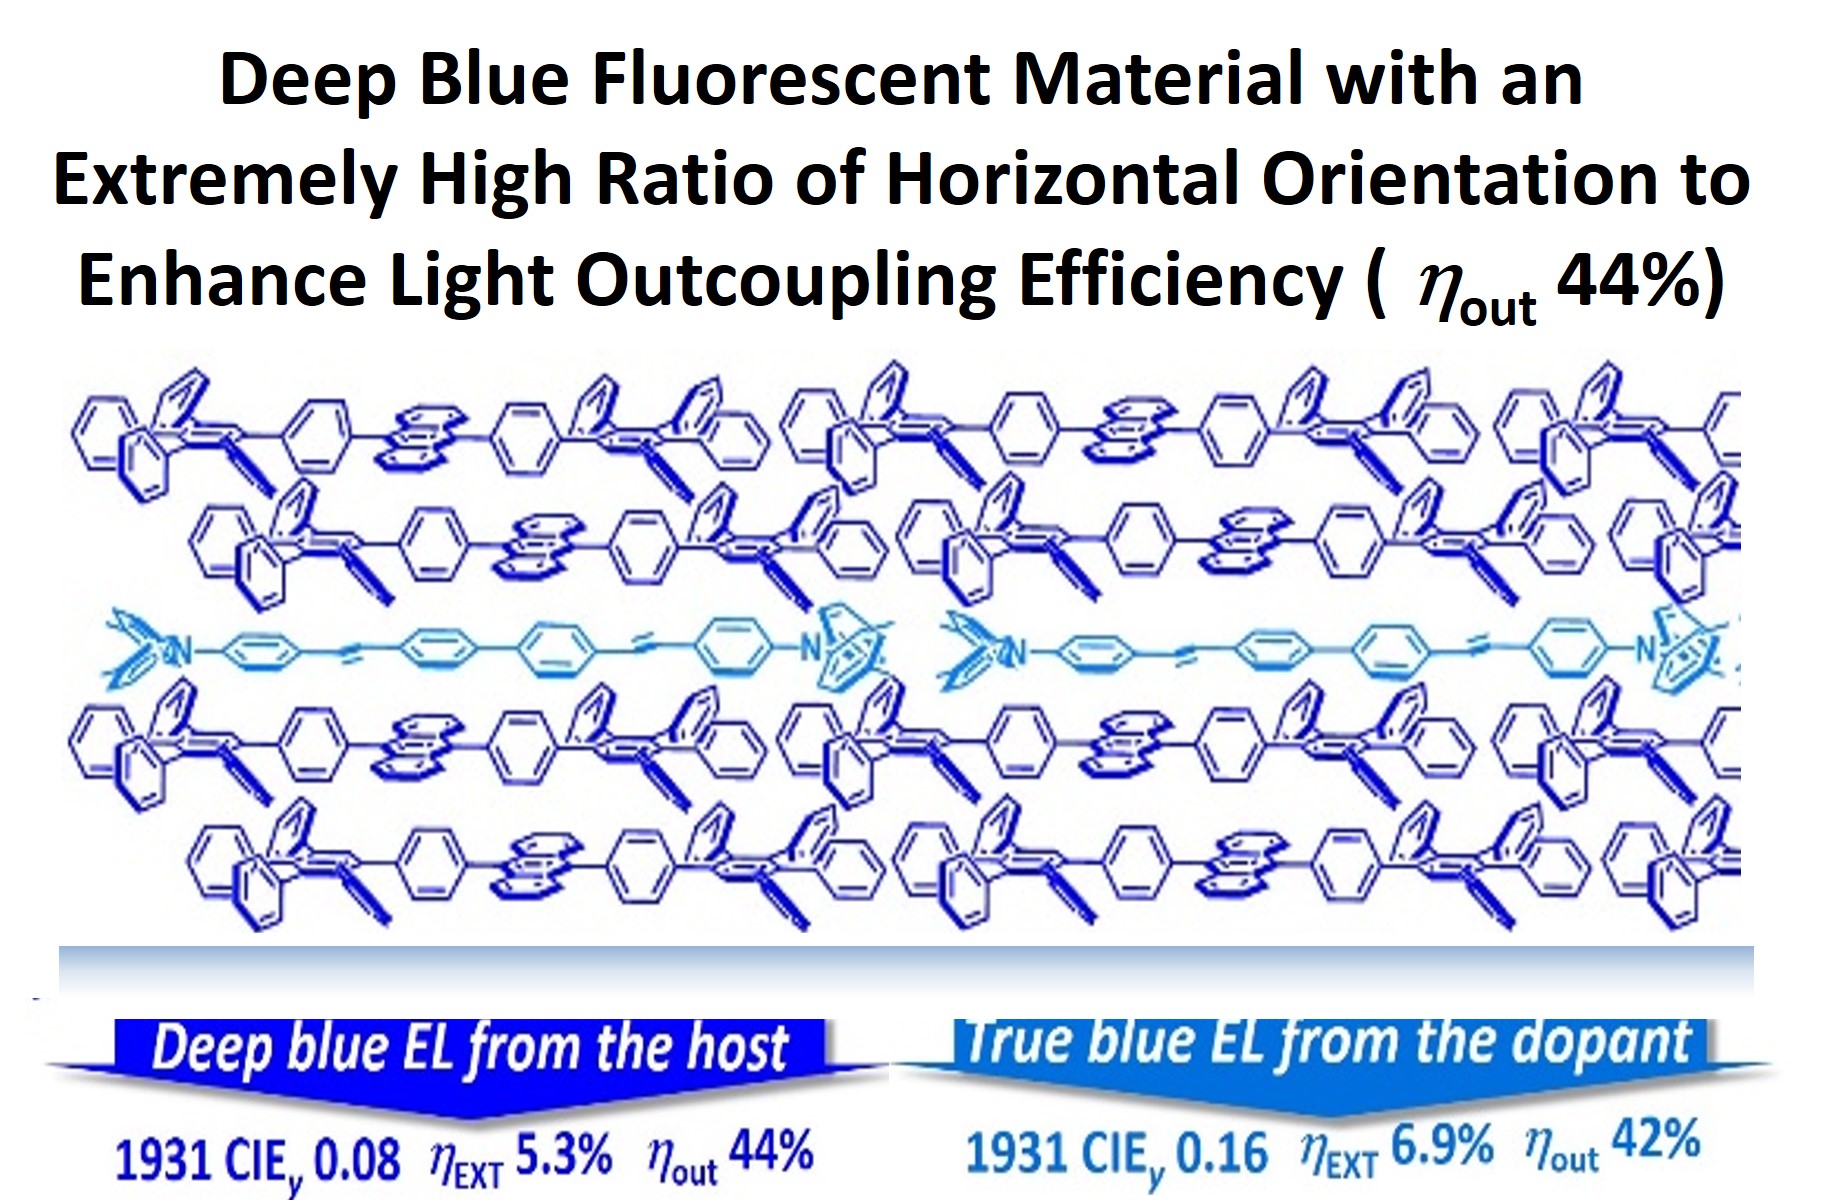 Deep Blue Fluorescent Material with an Extremely High Ratio of Horizontal Orientation to Enhance Light Outcoupling Efficiency ( 1/out 44%) 